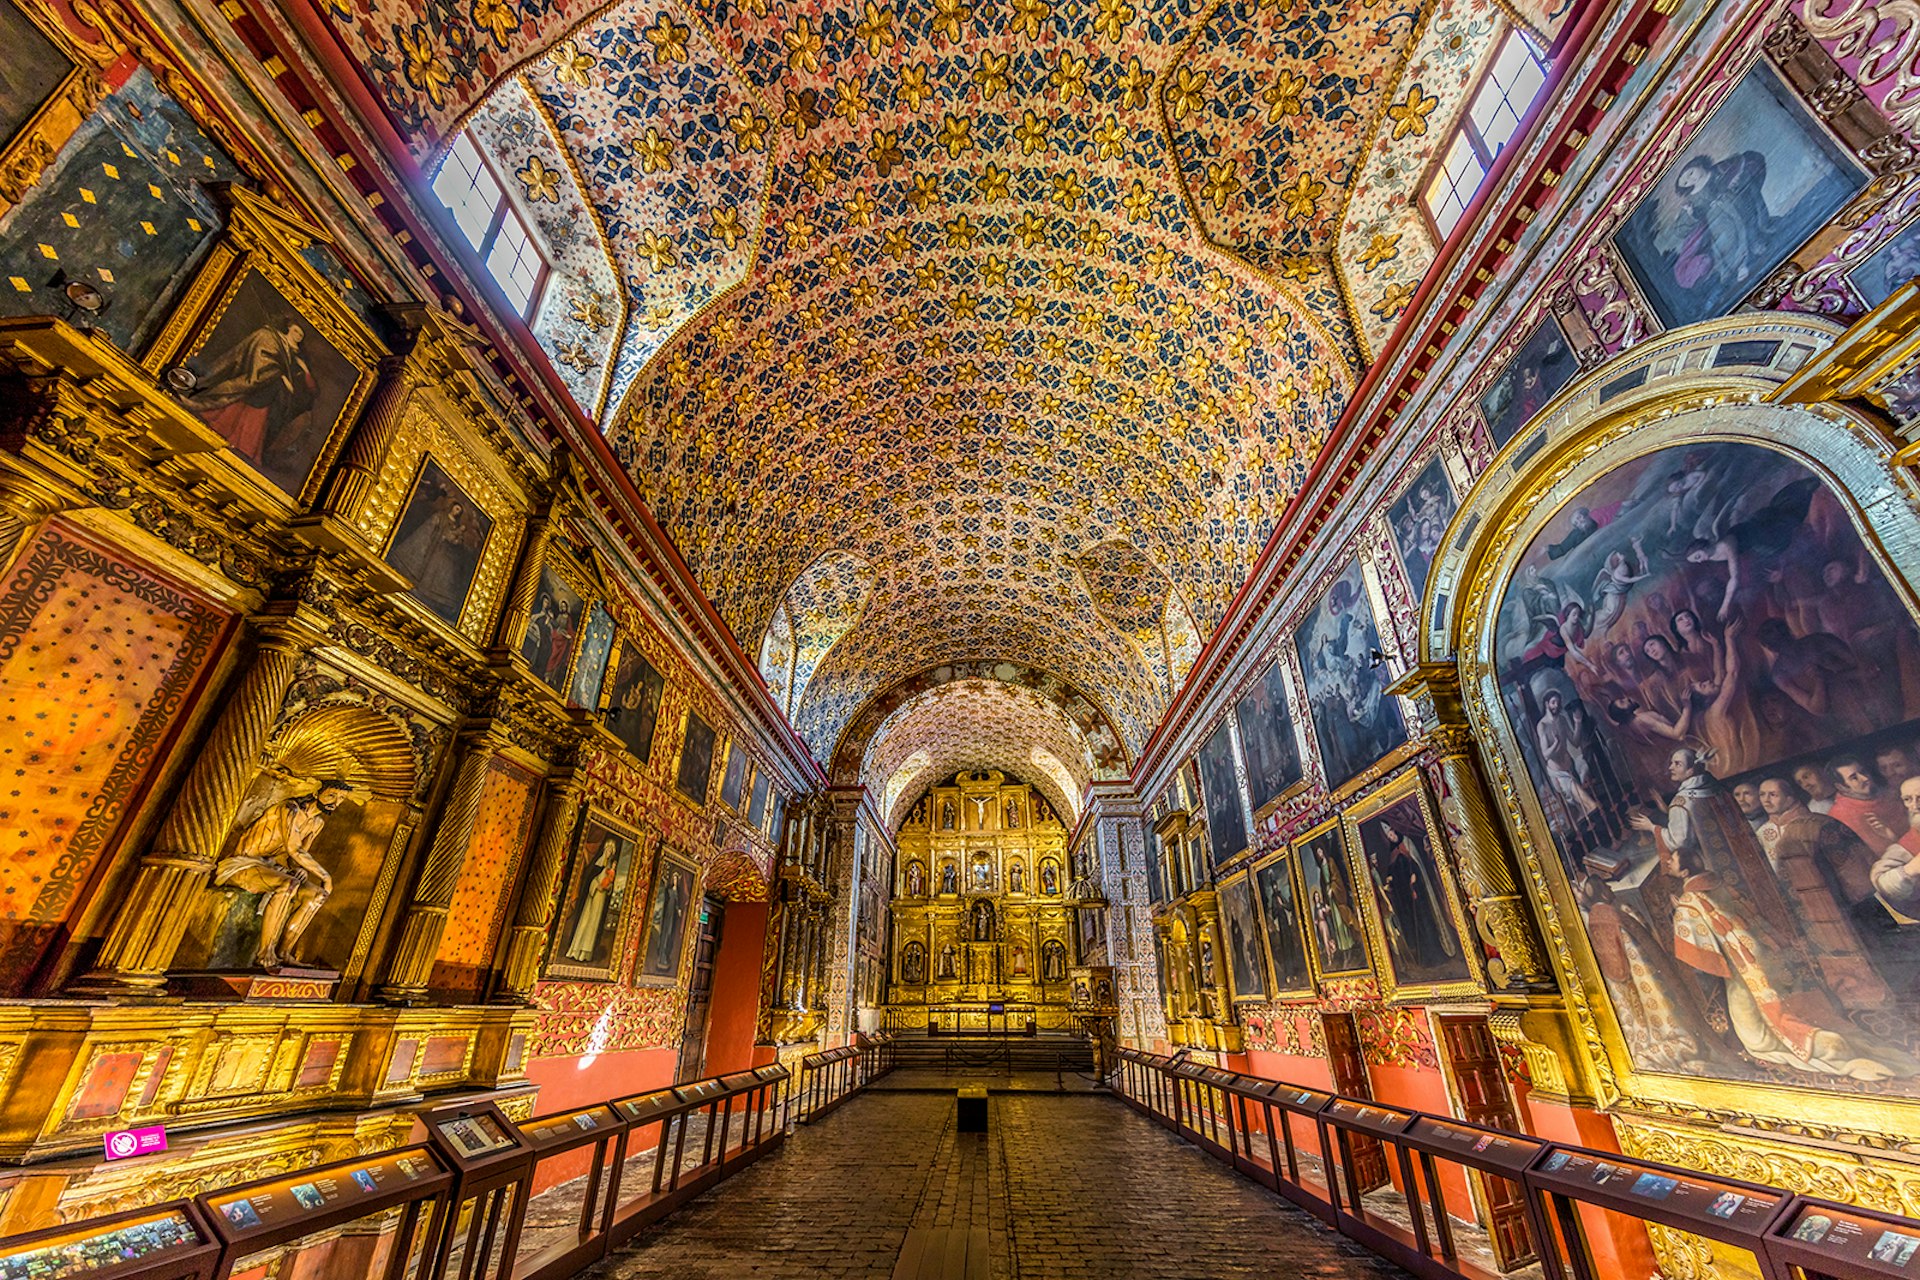 A view of the walls, vaulted ceiling, and gilded altar at Iglesia Museo de Santa Clara © OSTILL / Getty Images